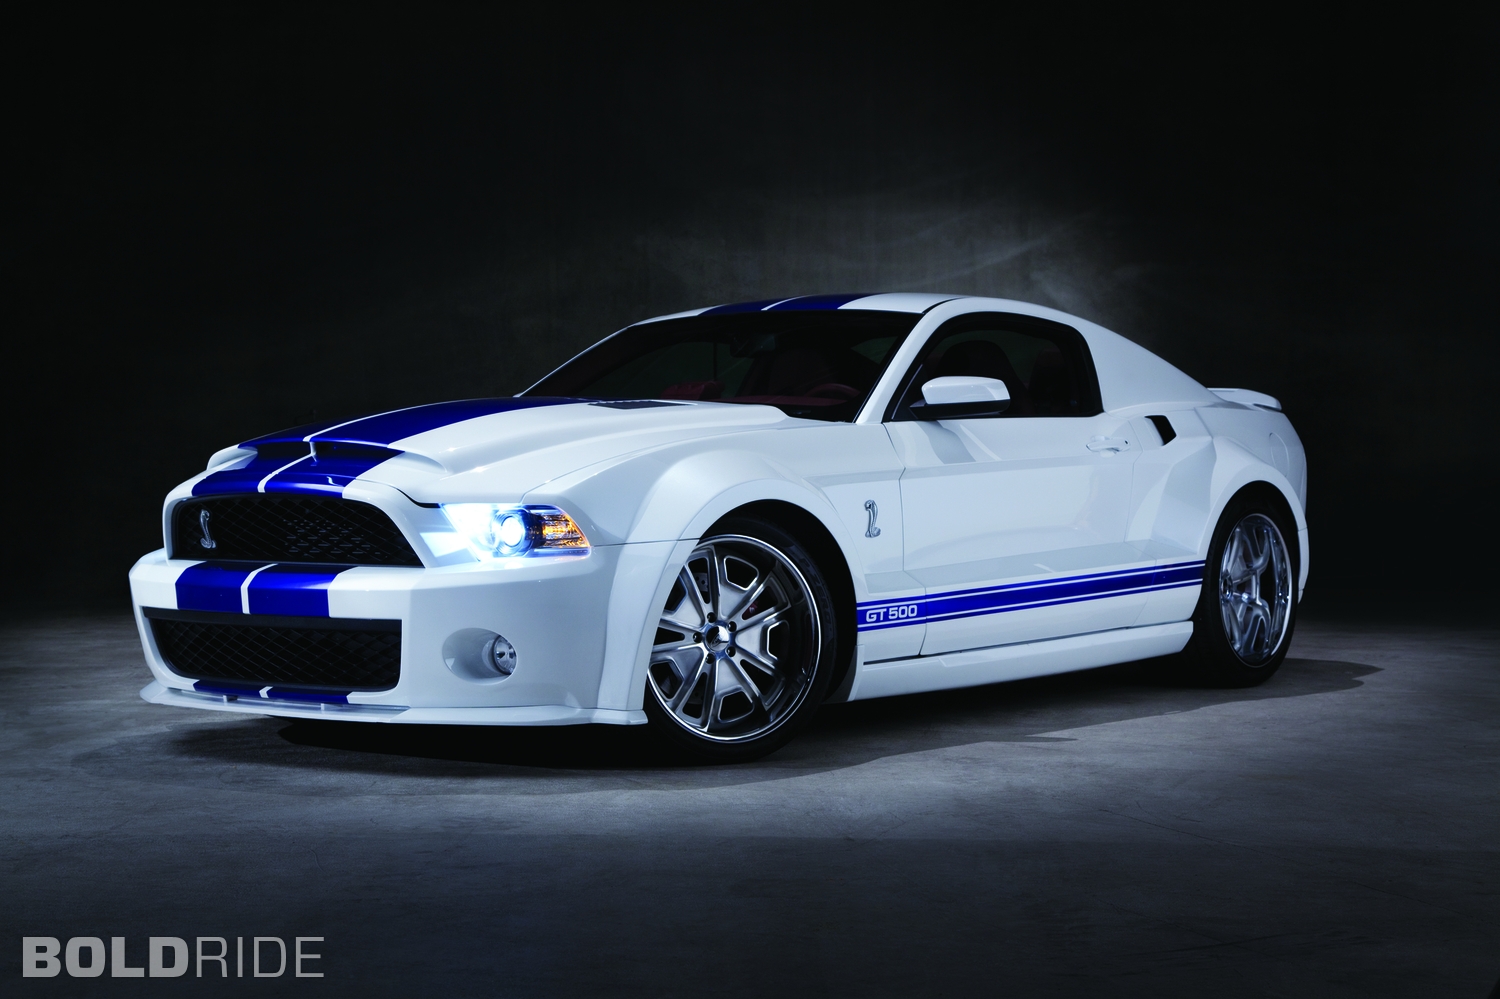 Shelby Cobra Gt500 Wallpaper Pictures To Pin